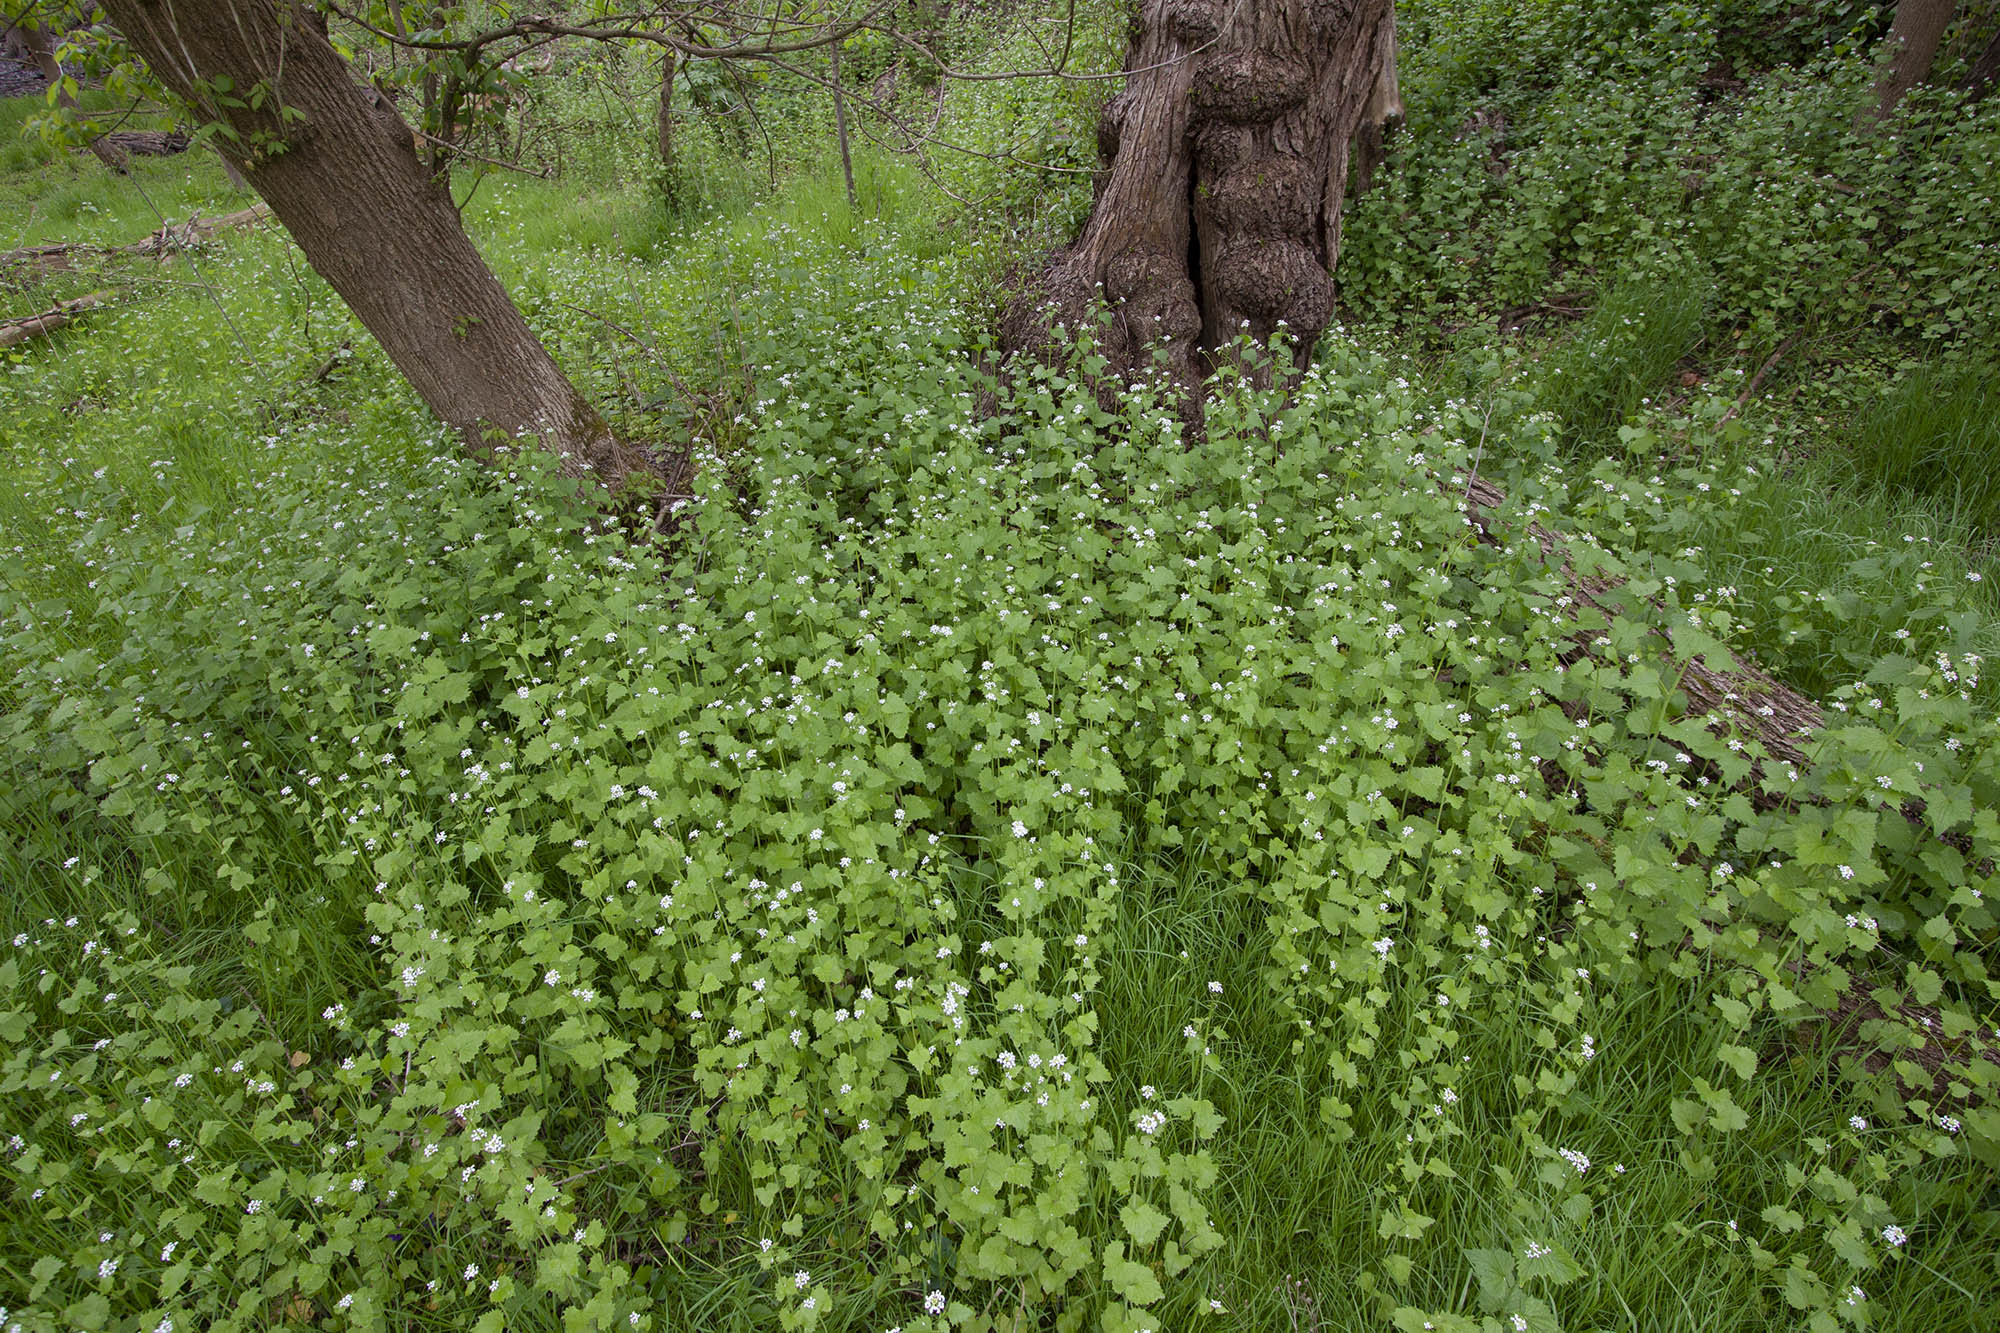 A mass of garlic mustard on the forest floor.